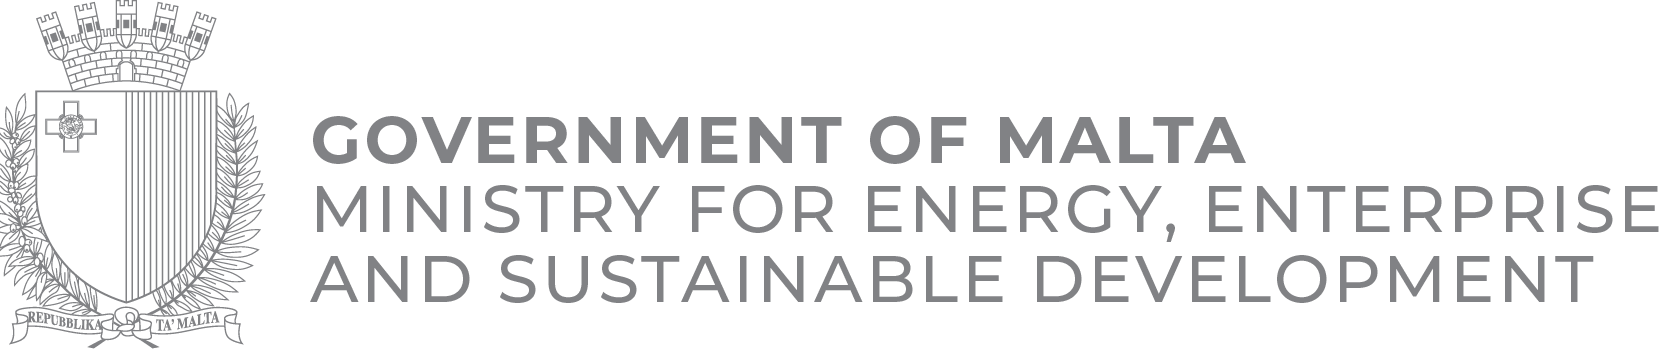 Ministry for Energy, Enterprise and Sustainable Development